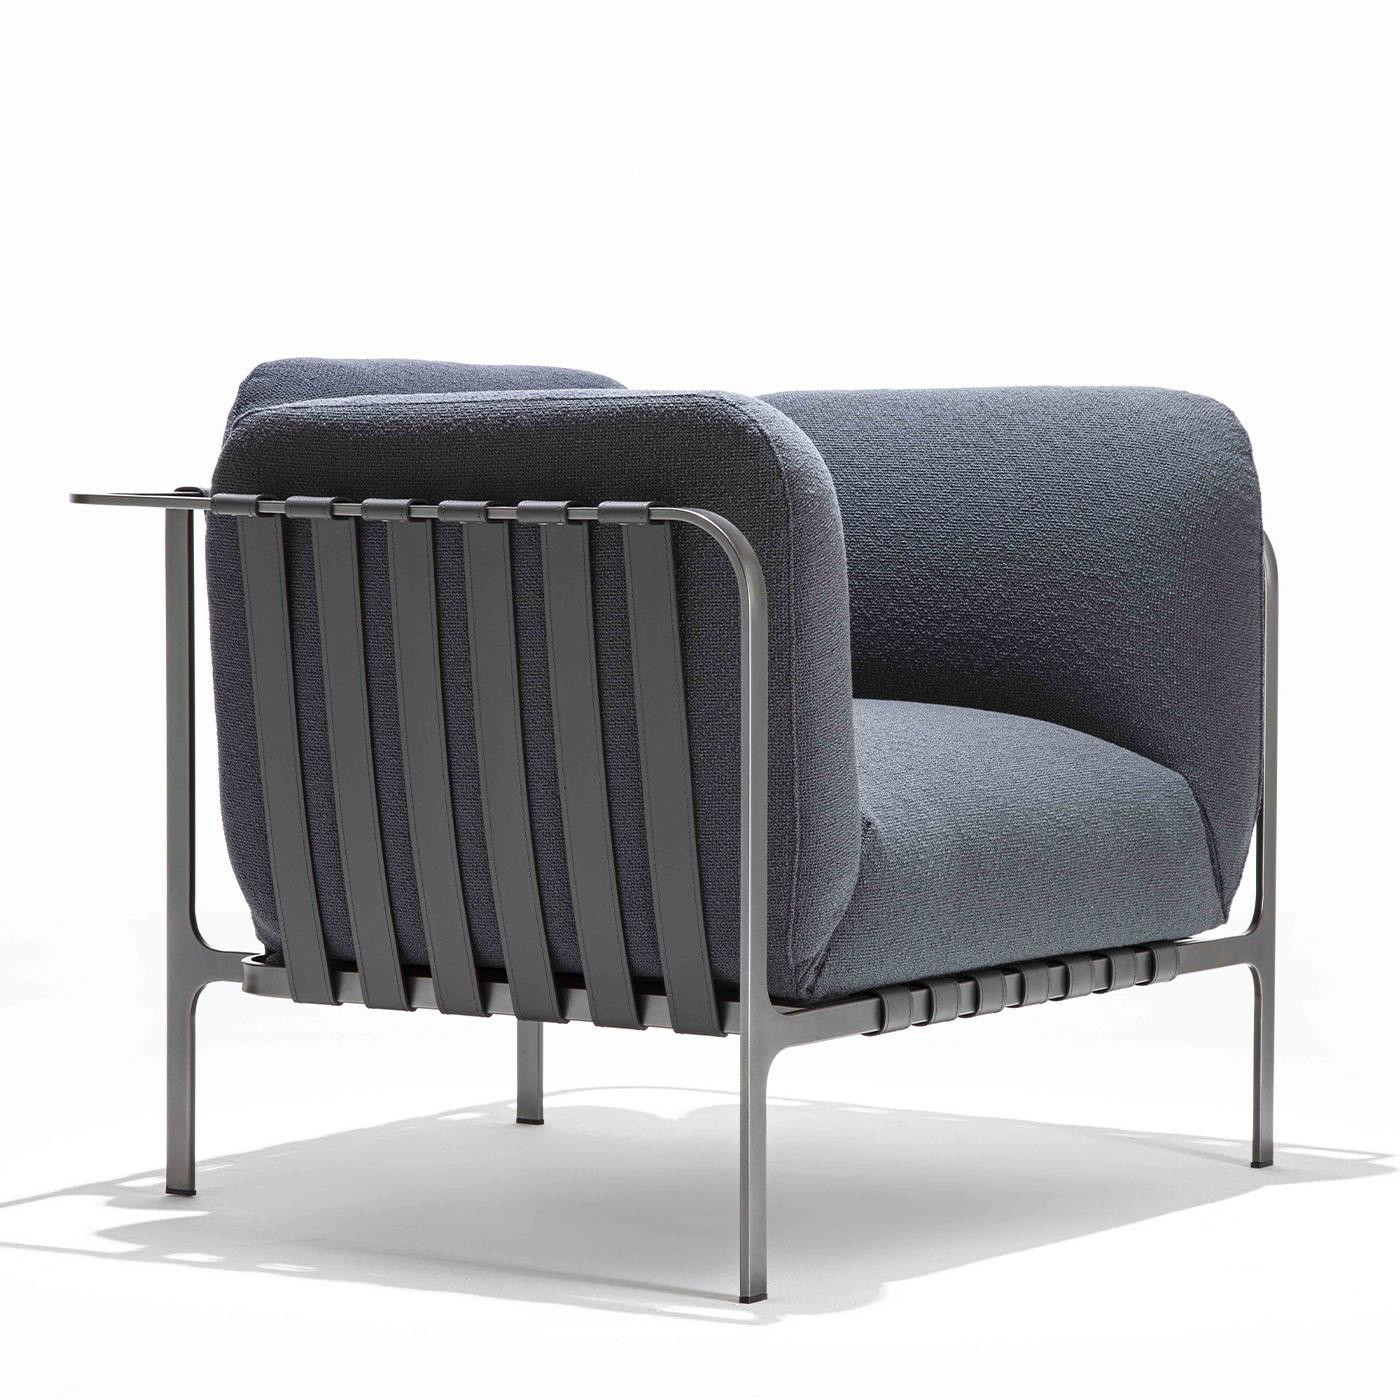 Part of the contemporary Sydney Collection, this armchair is all-out modern elegance. Marked by a dynamic appeal, the generously padded seat, back, and armrest cushions are enclosed in a slender cylindrical frame reinforced with leather straps for